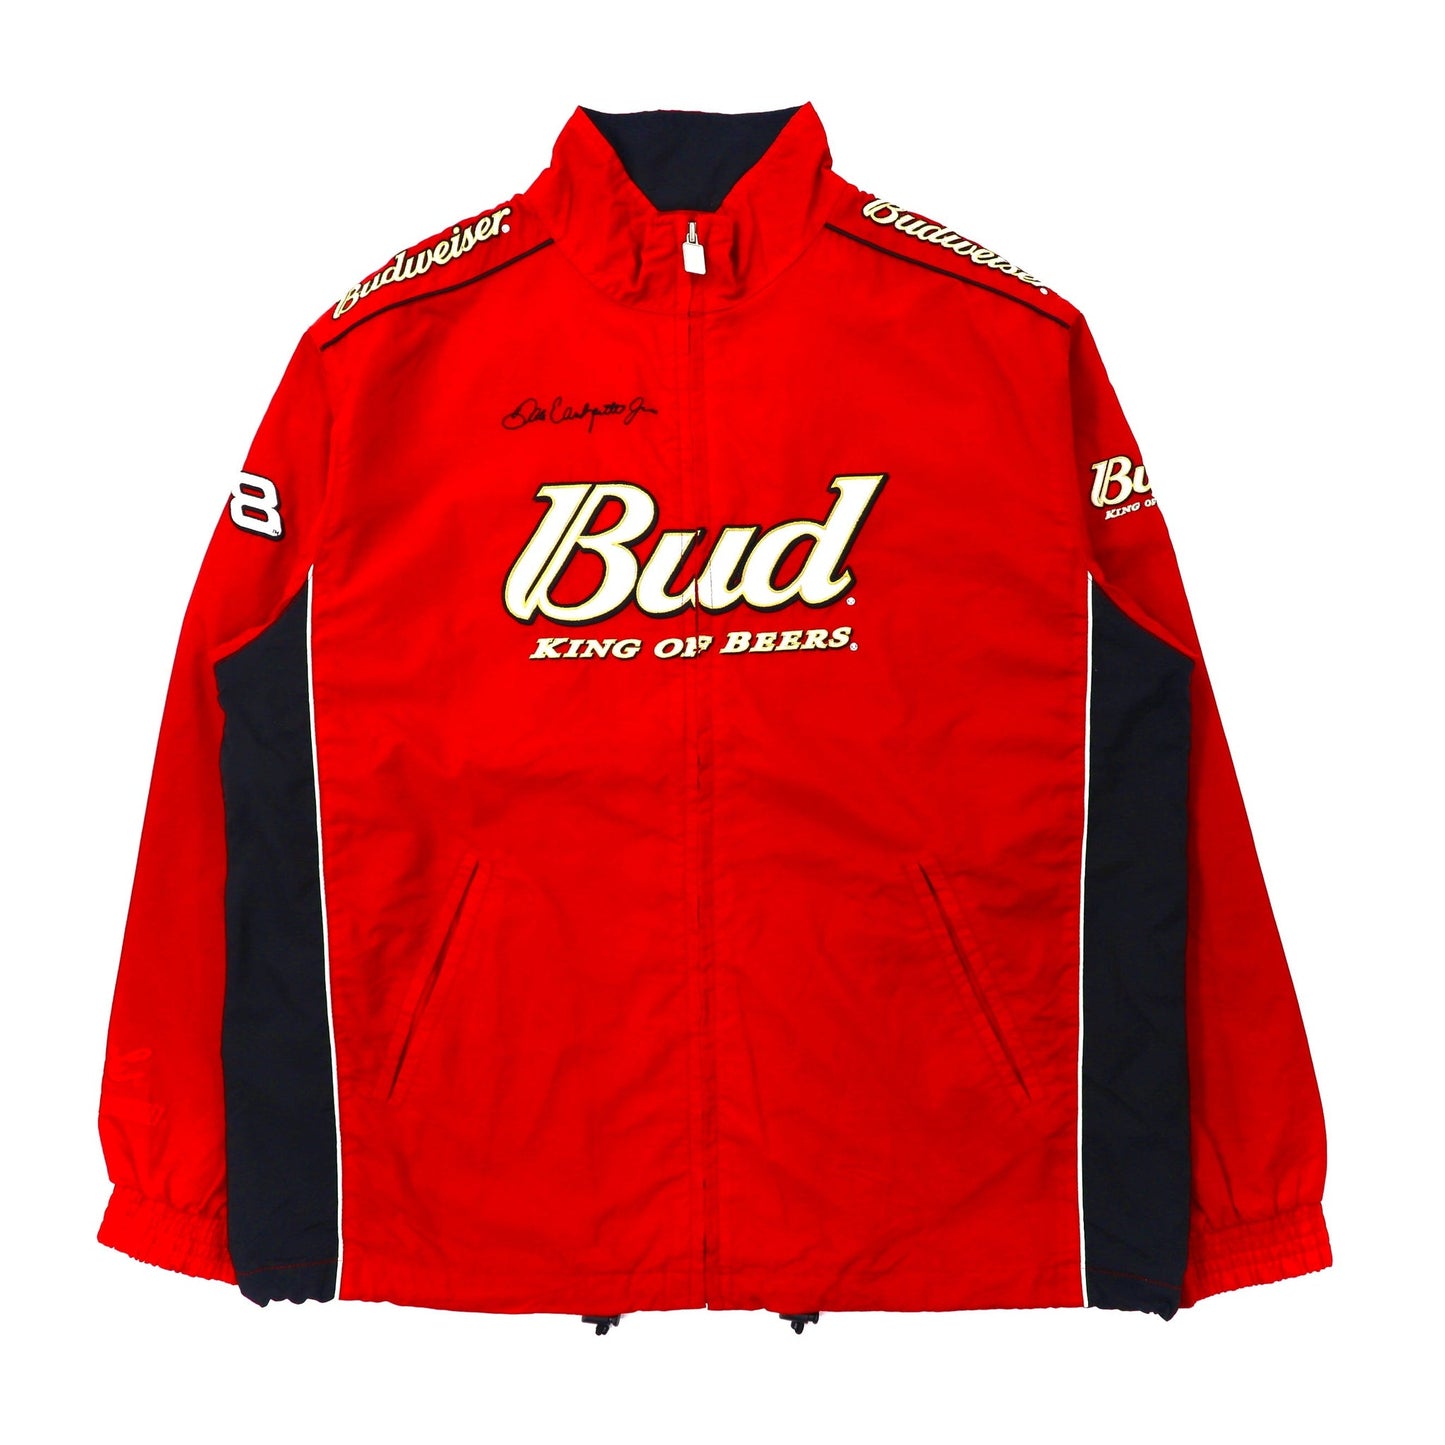 CHASE AUTHENTICS Racing Jacket M Red Nylon Budweiser Embroidery ...